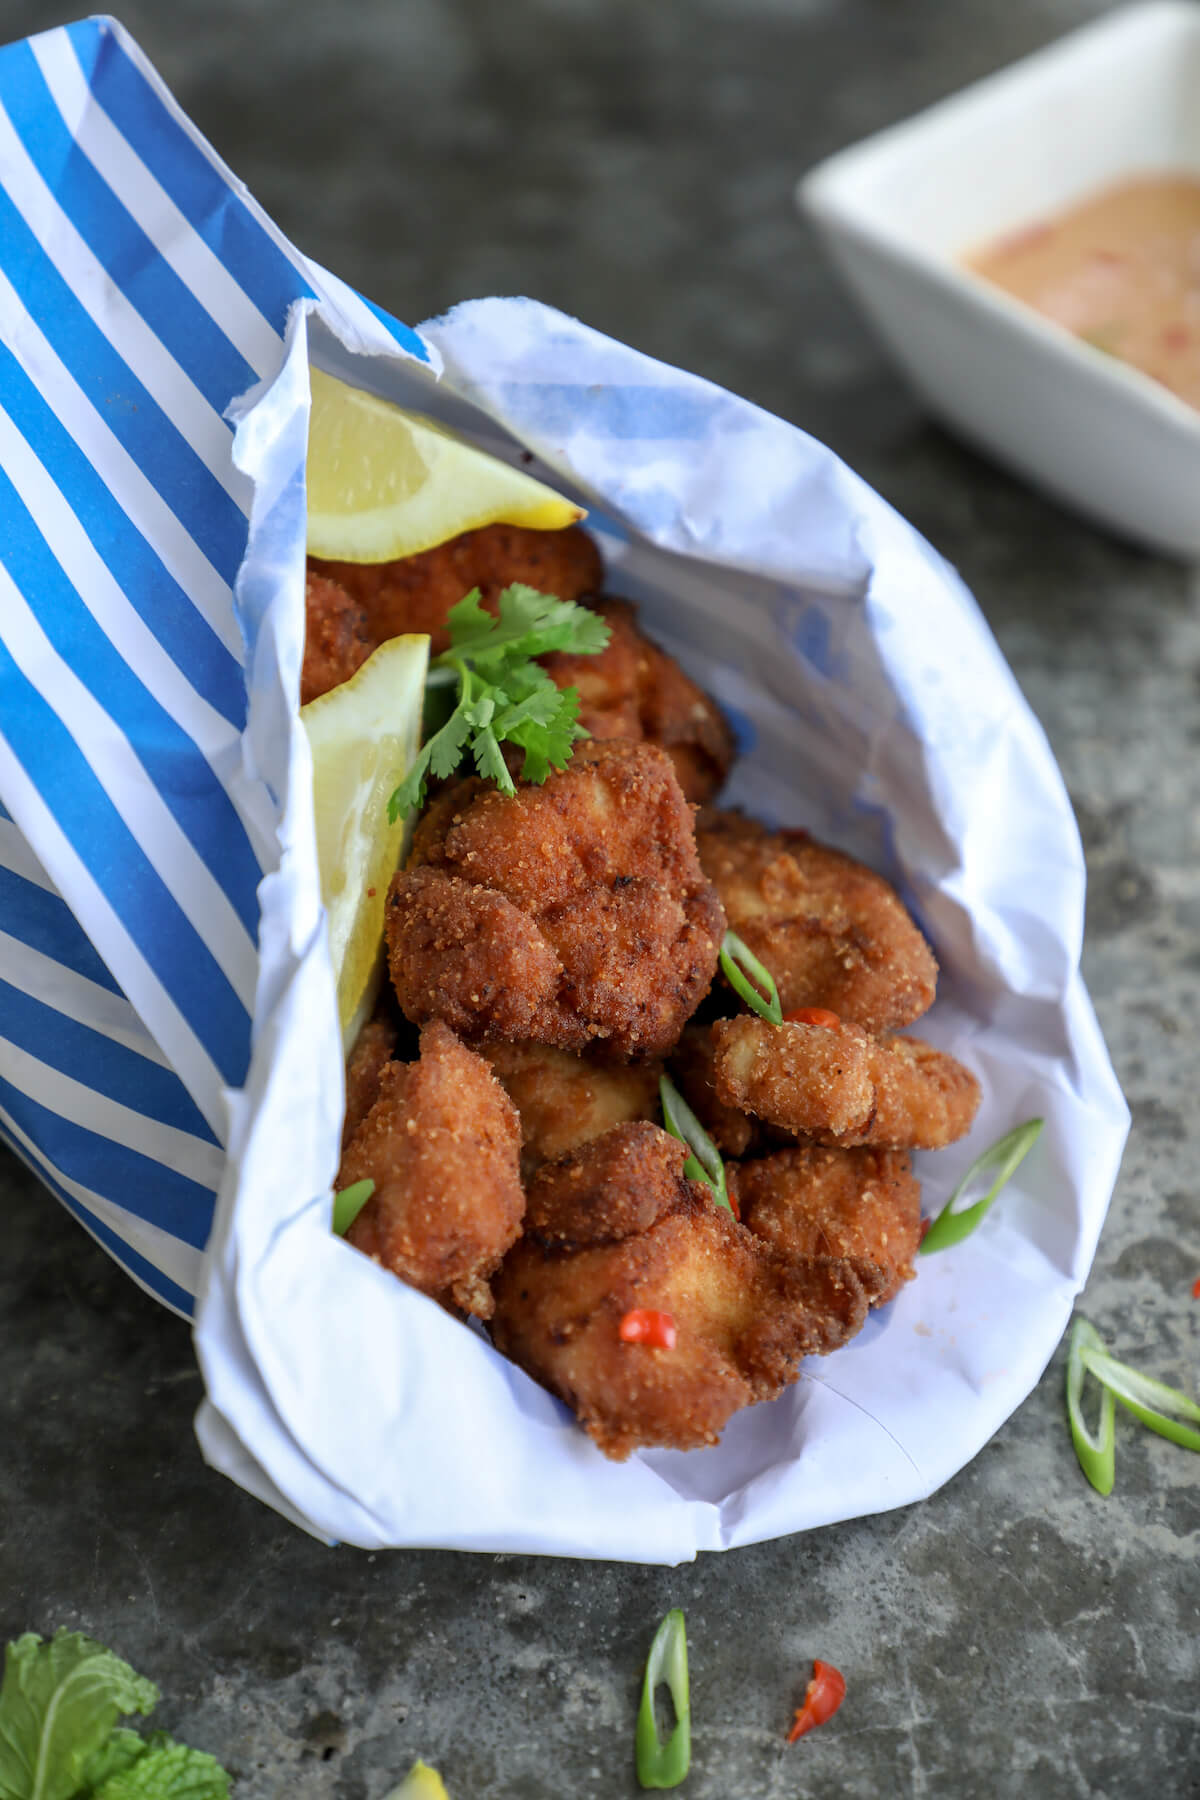 Keto Chicken Karaage in a blue and white striped paper bag